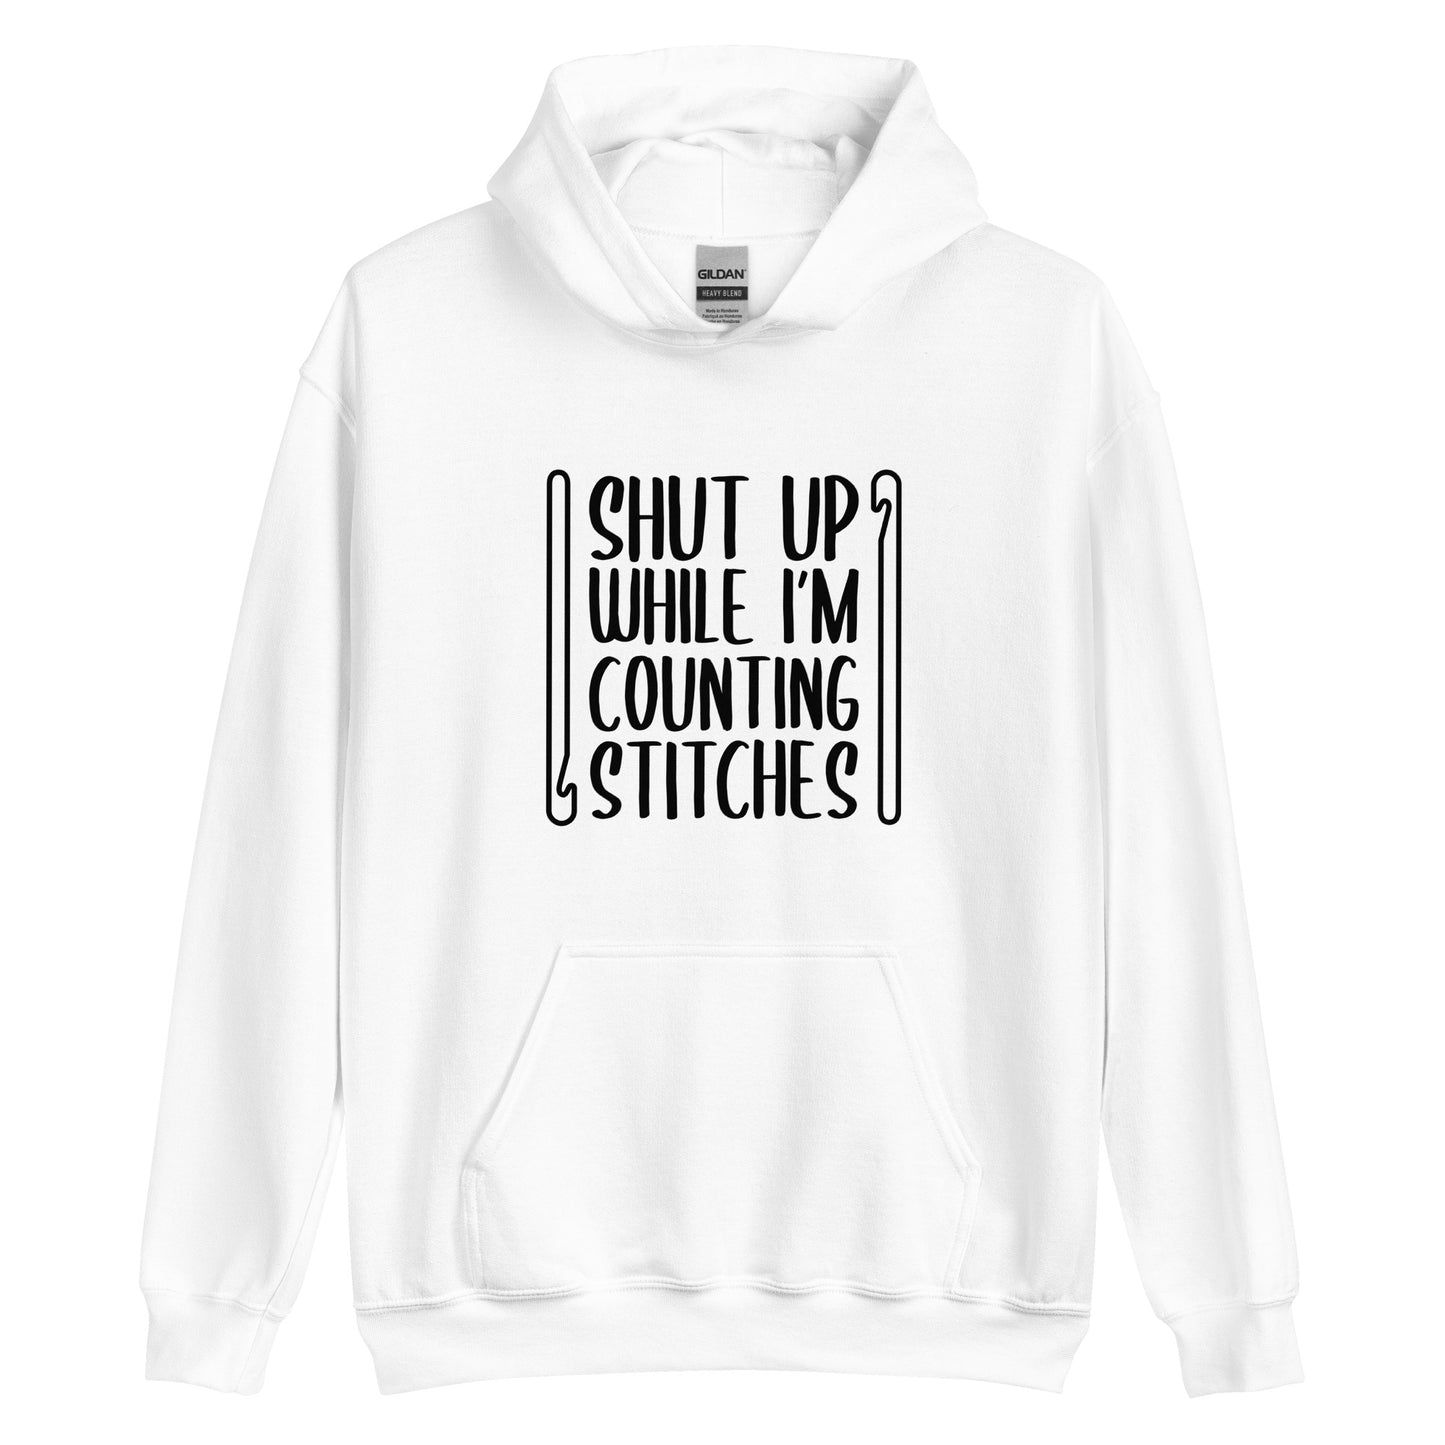 A white hooded sweatshirt featuring black text that reads "Shut up while I'm counting stitches." The text is framed by a crochet hook to the left and right.